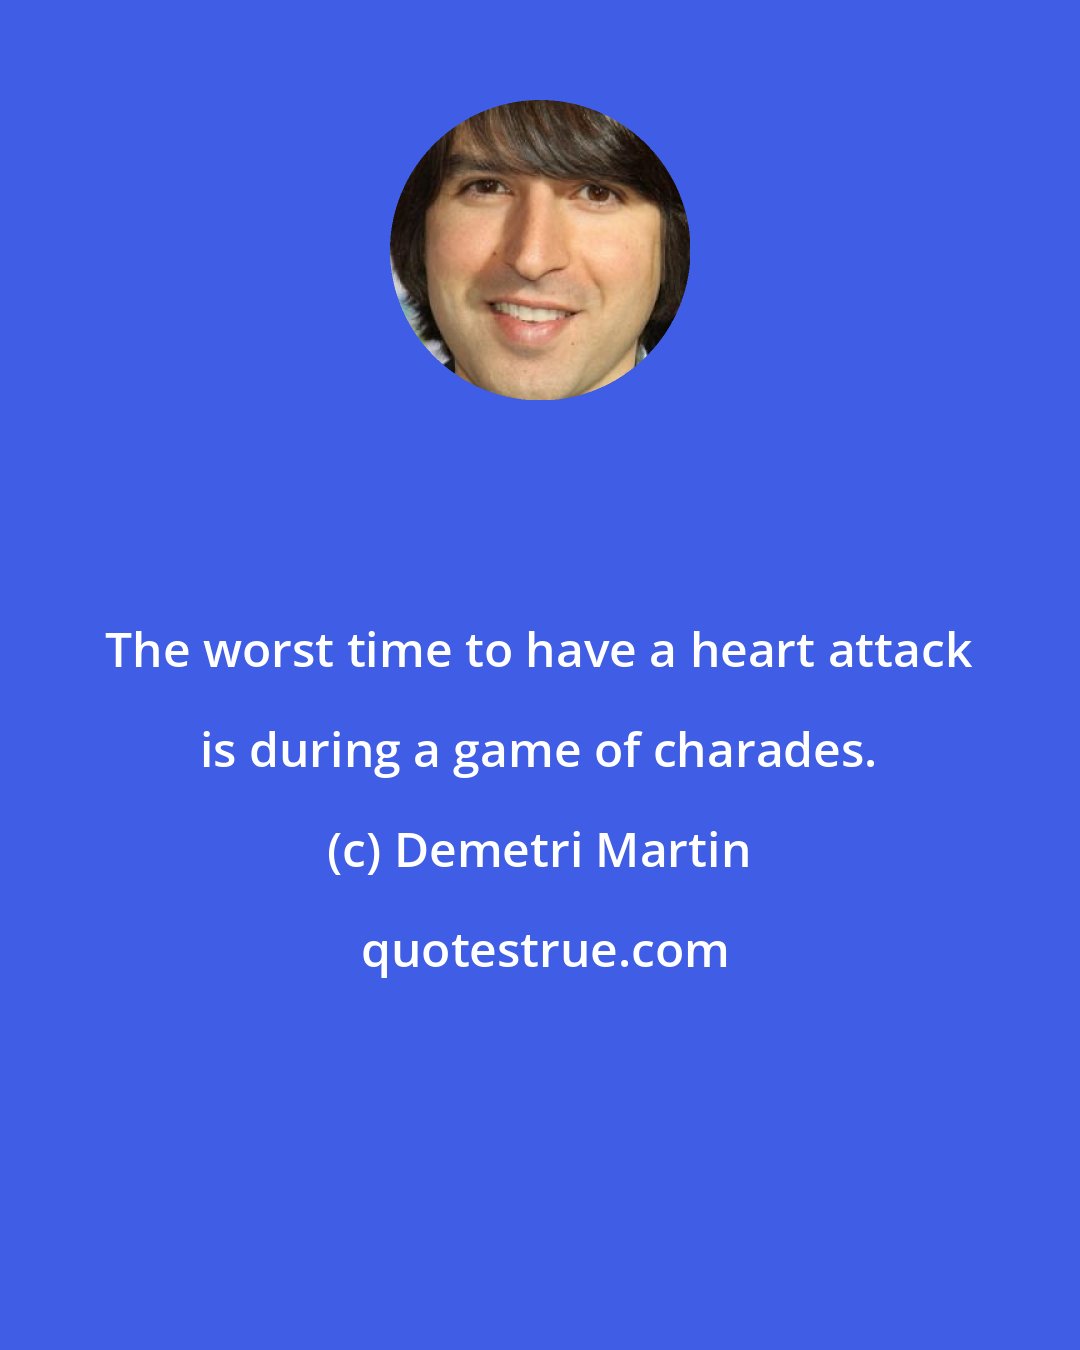 Demetri Martin: The worst time to have a heart attack is during a game of charades.